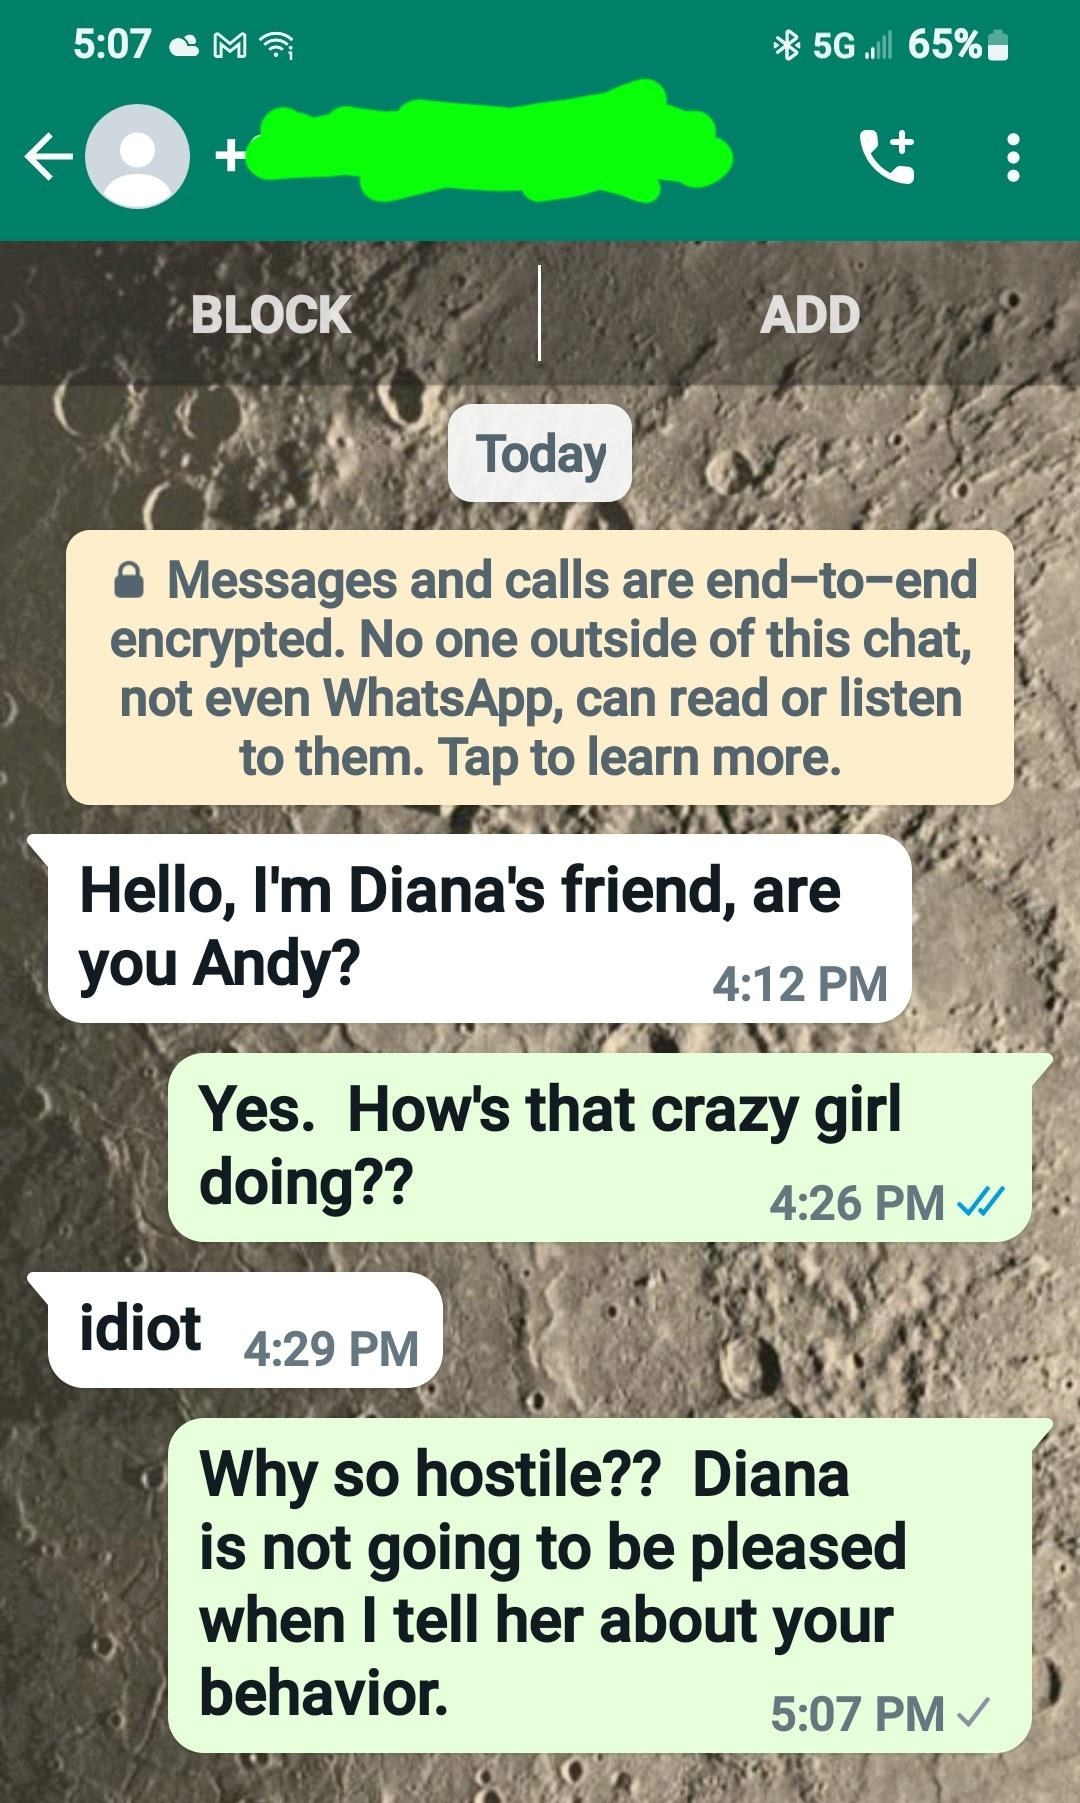 scammer who tries to say they arre diana&#x27;s friend and getts angry when called out